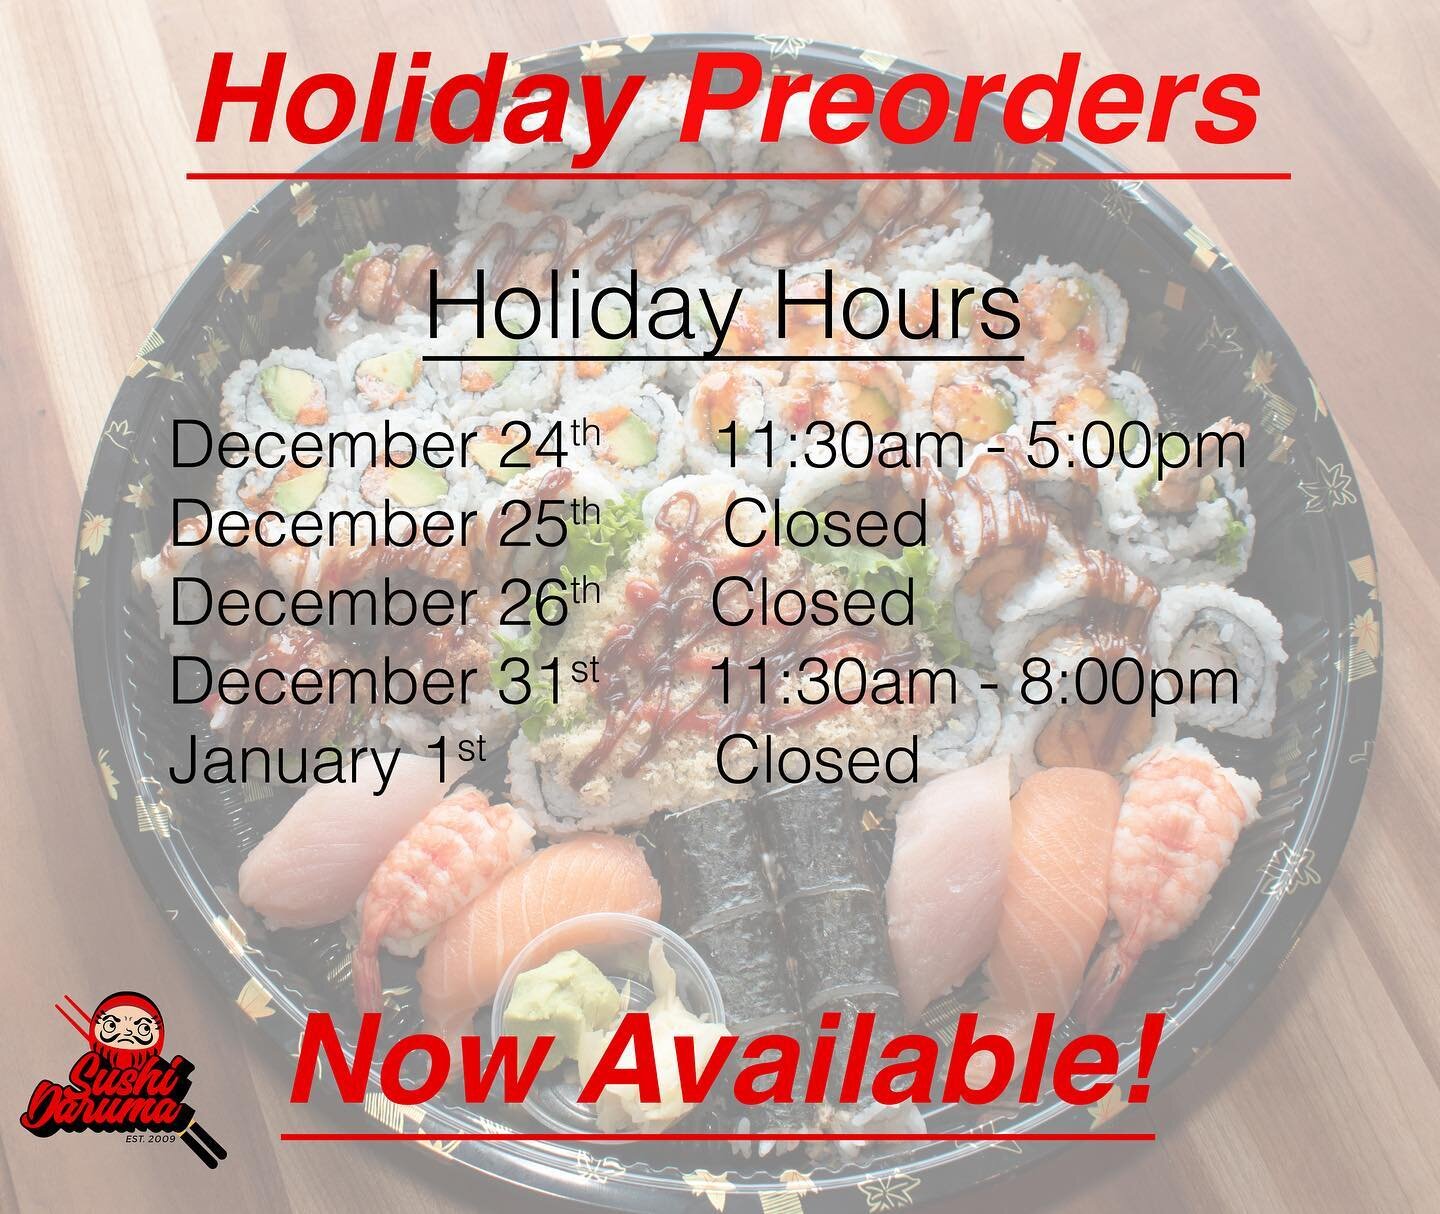 The holidays are here! While we can&rsquo;t host you at our place, we look forward to bringing our signature sushi to yours.  Preorders are now available for the following days, 
December 24: 11:30am - 5:00pm
December 31: 11:30am - 8:00pm

Whether it